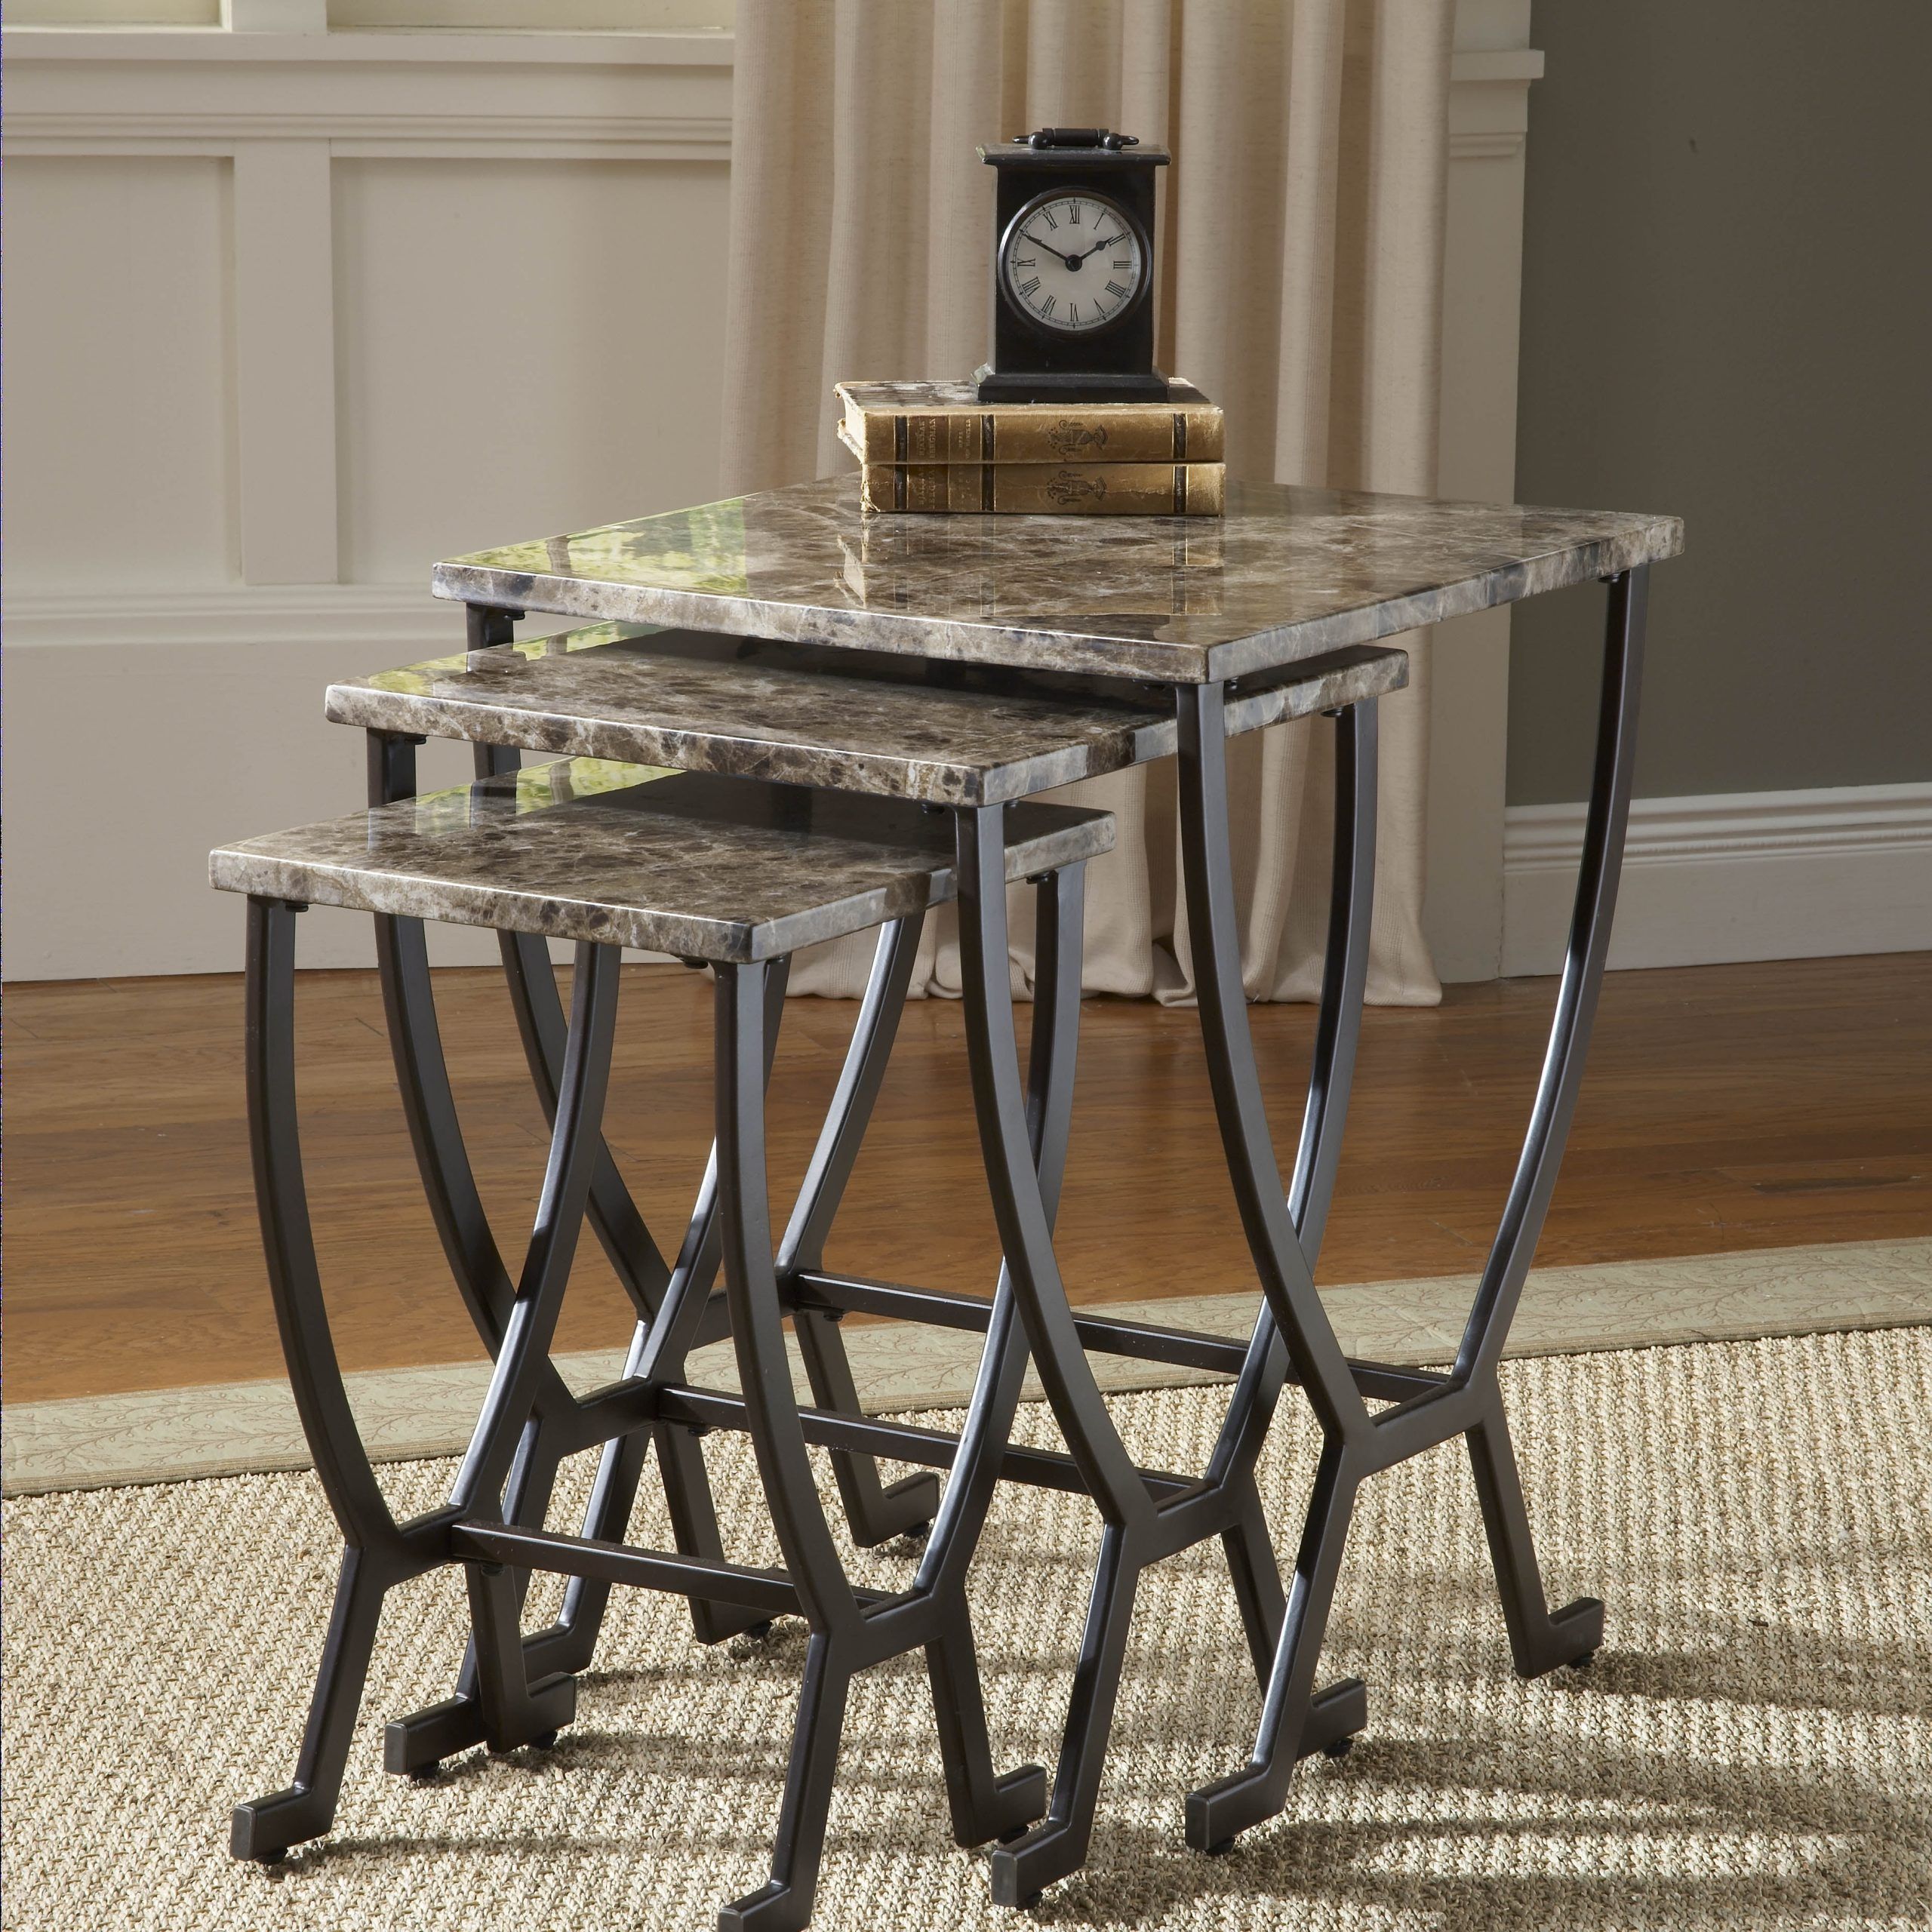 Hillsdale Furniture Monaco Faux Marble Top Nesting Tables, Espresso Throughout Monaco Round Coffee Tables (Gallery 17 of 20)